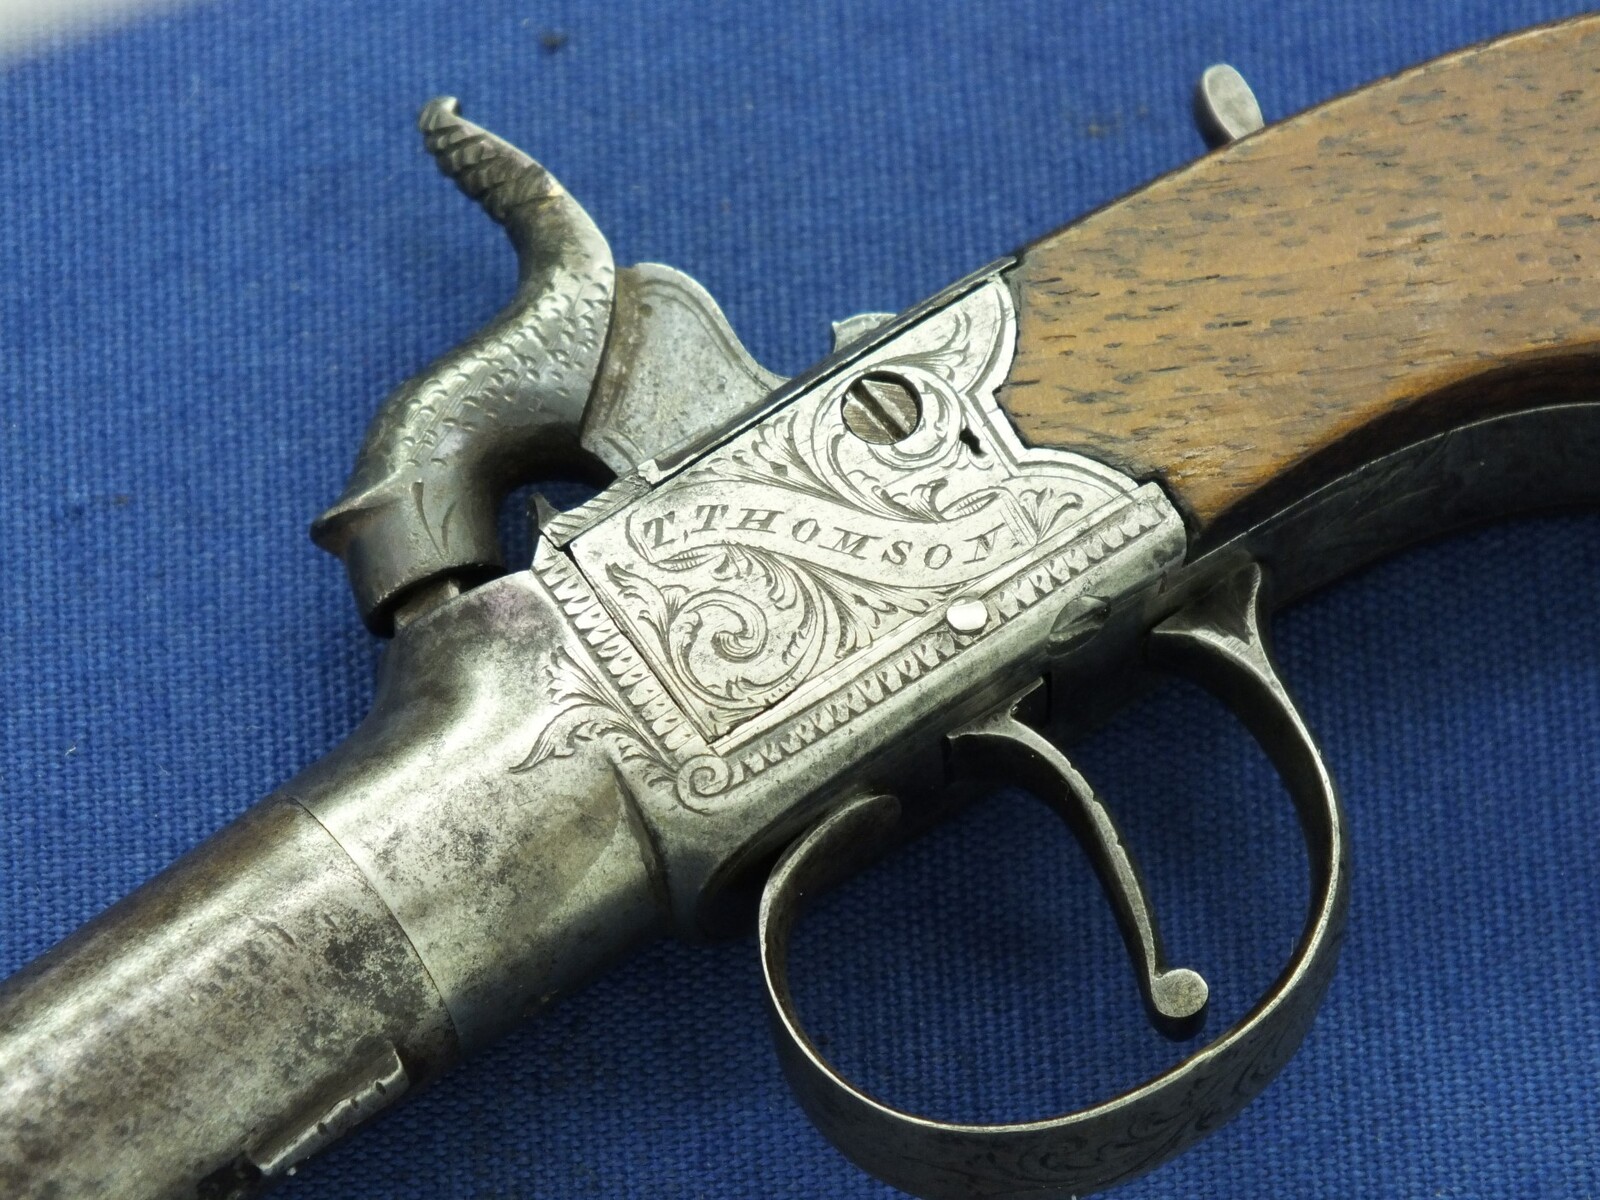 An antique 19th Century Scottish Percussion Pistol by T.THOMSON (Edinburgh), caliber 11mm, length 20 cm, in very good condition. Price 595 euro